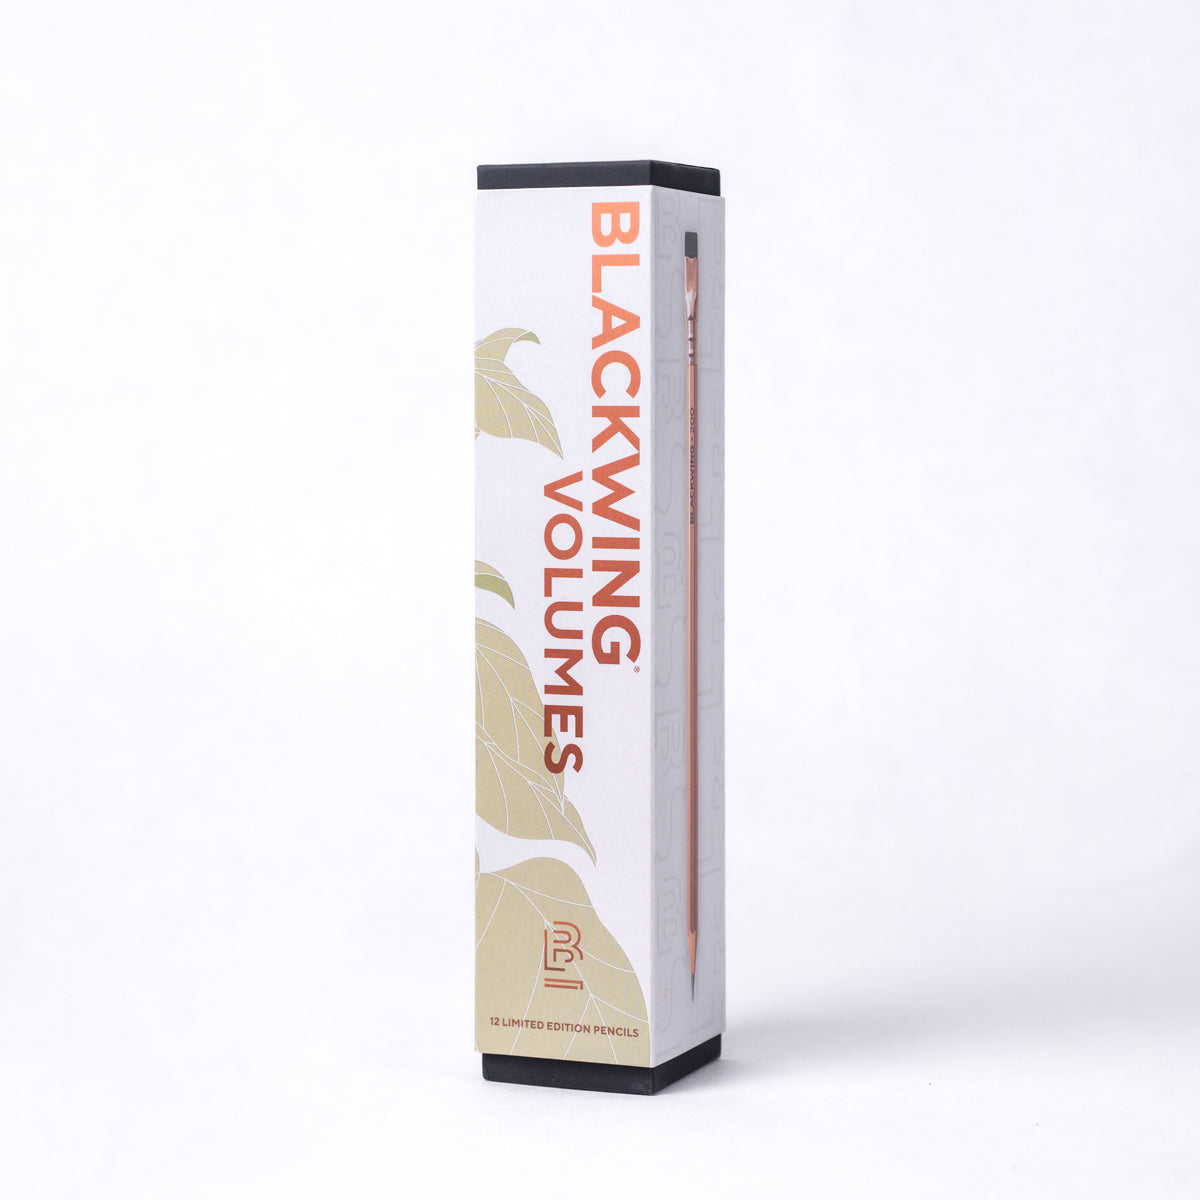 Blackwing Volume 200 - The Coffeehouse